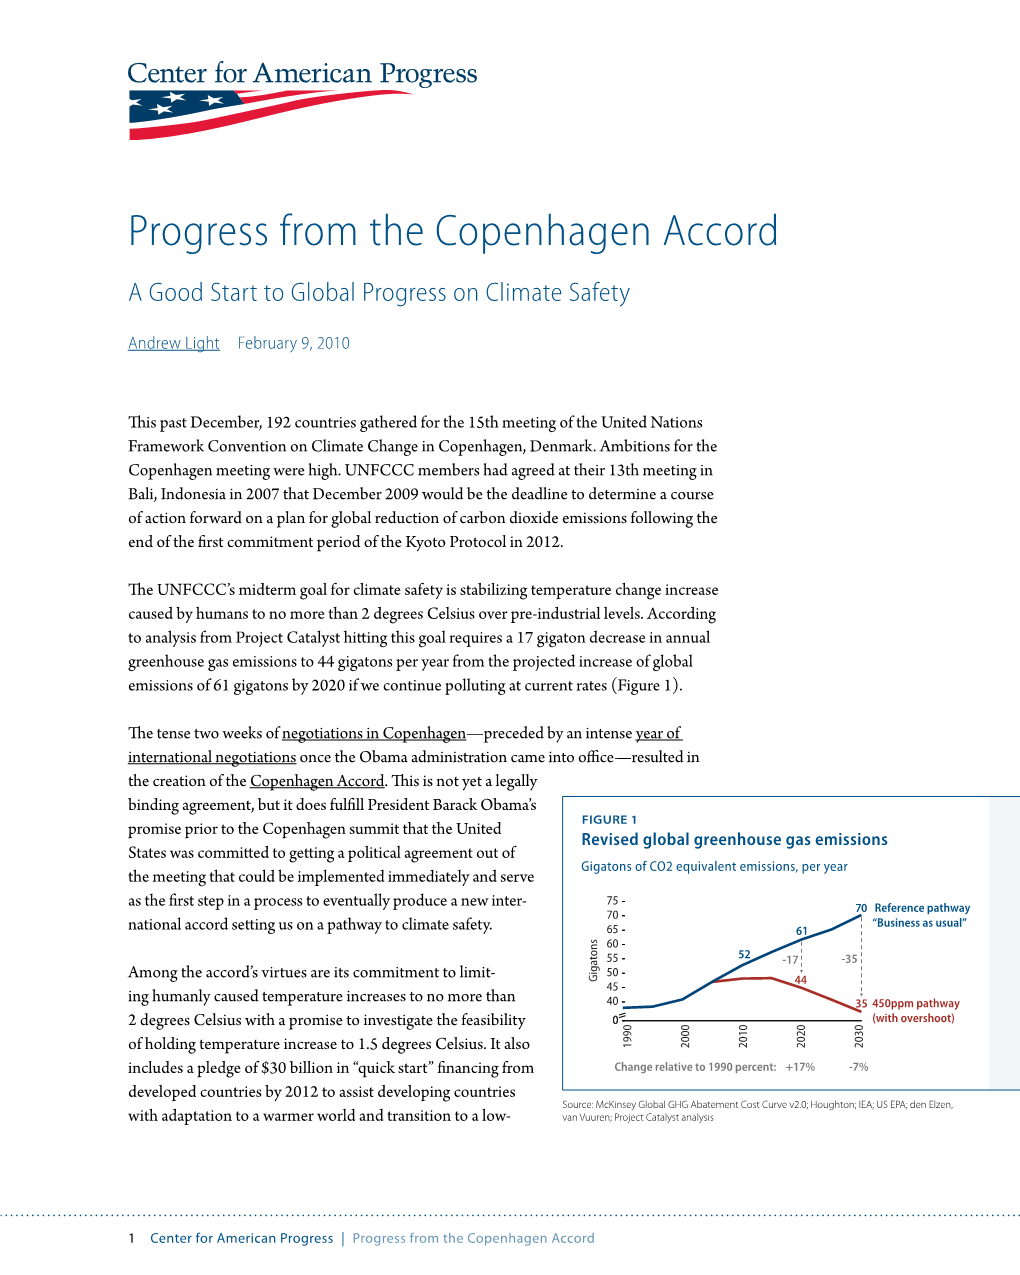 Progress from the Copenhagen Accord a Good Start to Global Progress on Climate Safety